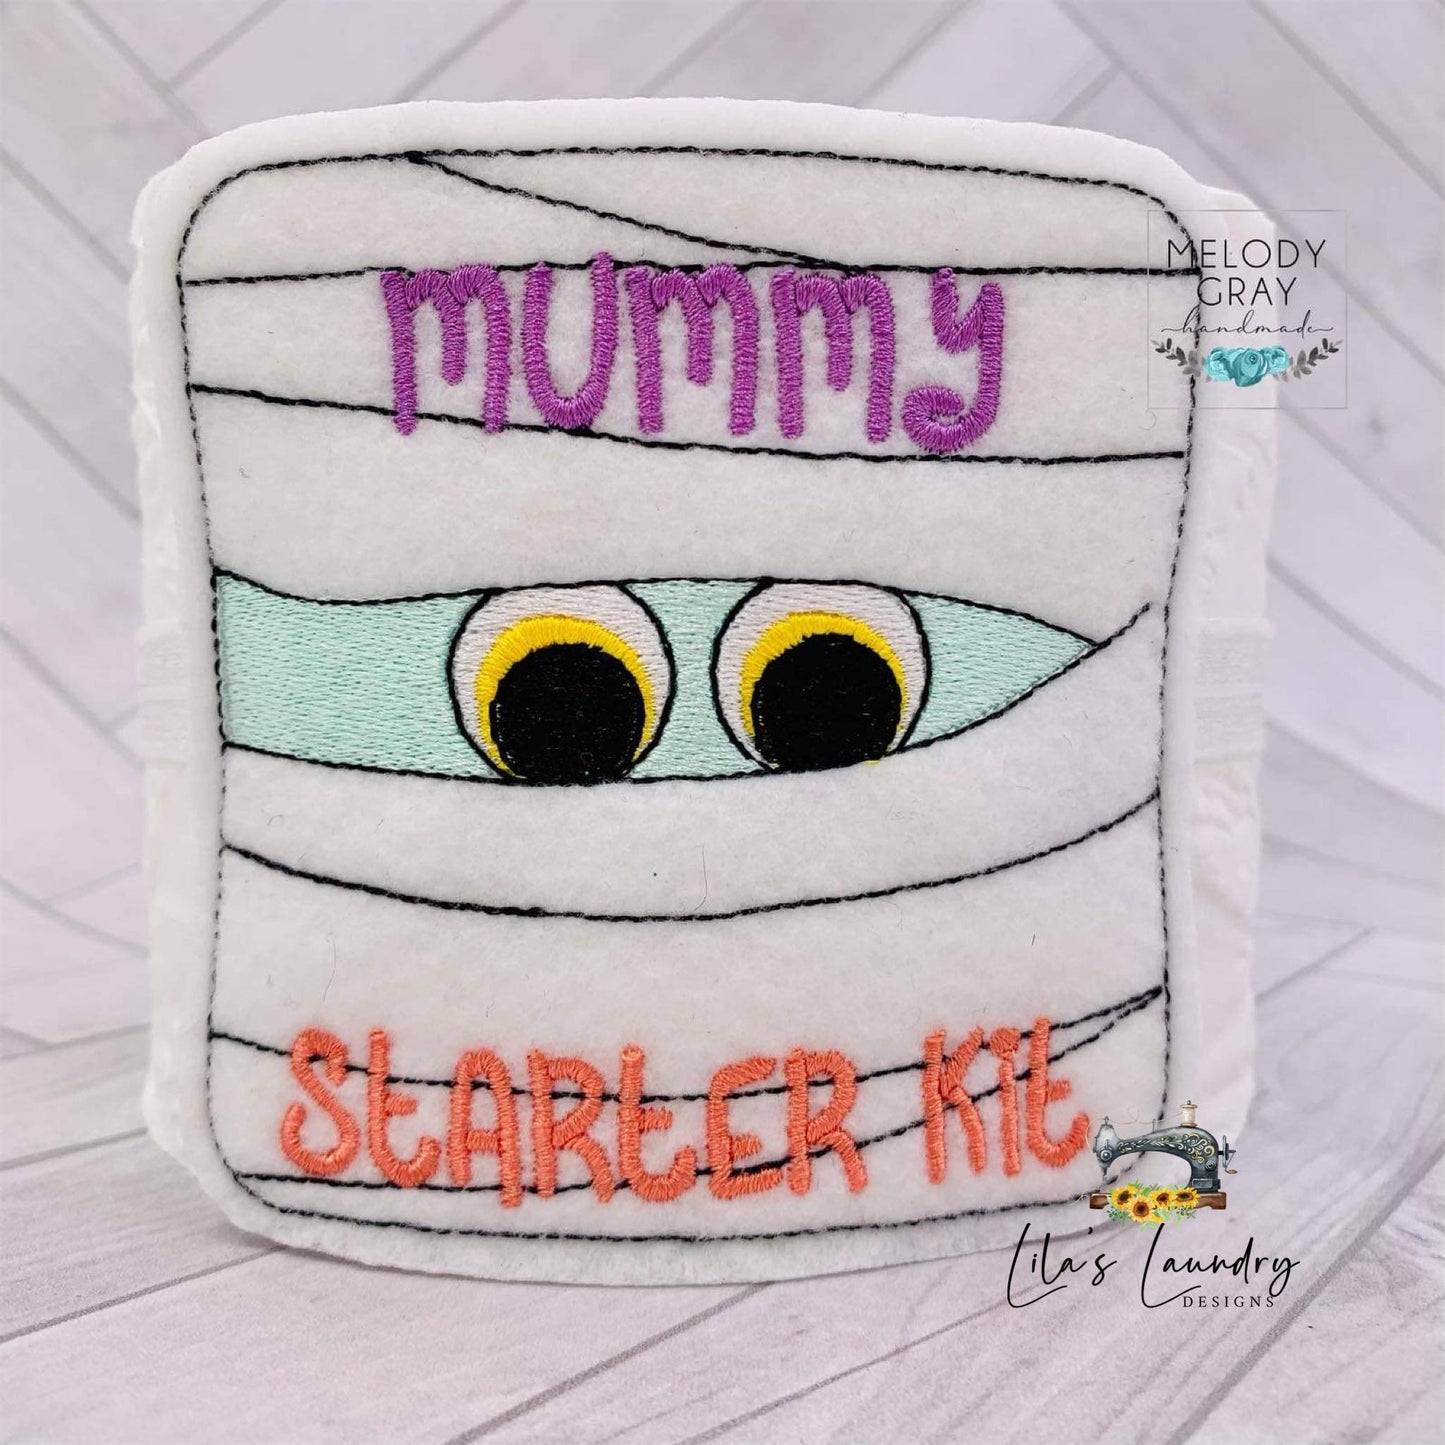 Mummy Stater Kit - TP tie 4x4 - DIGITAL Embroidery DESIGN